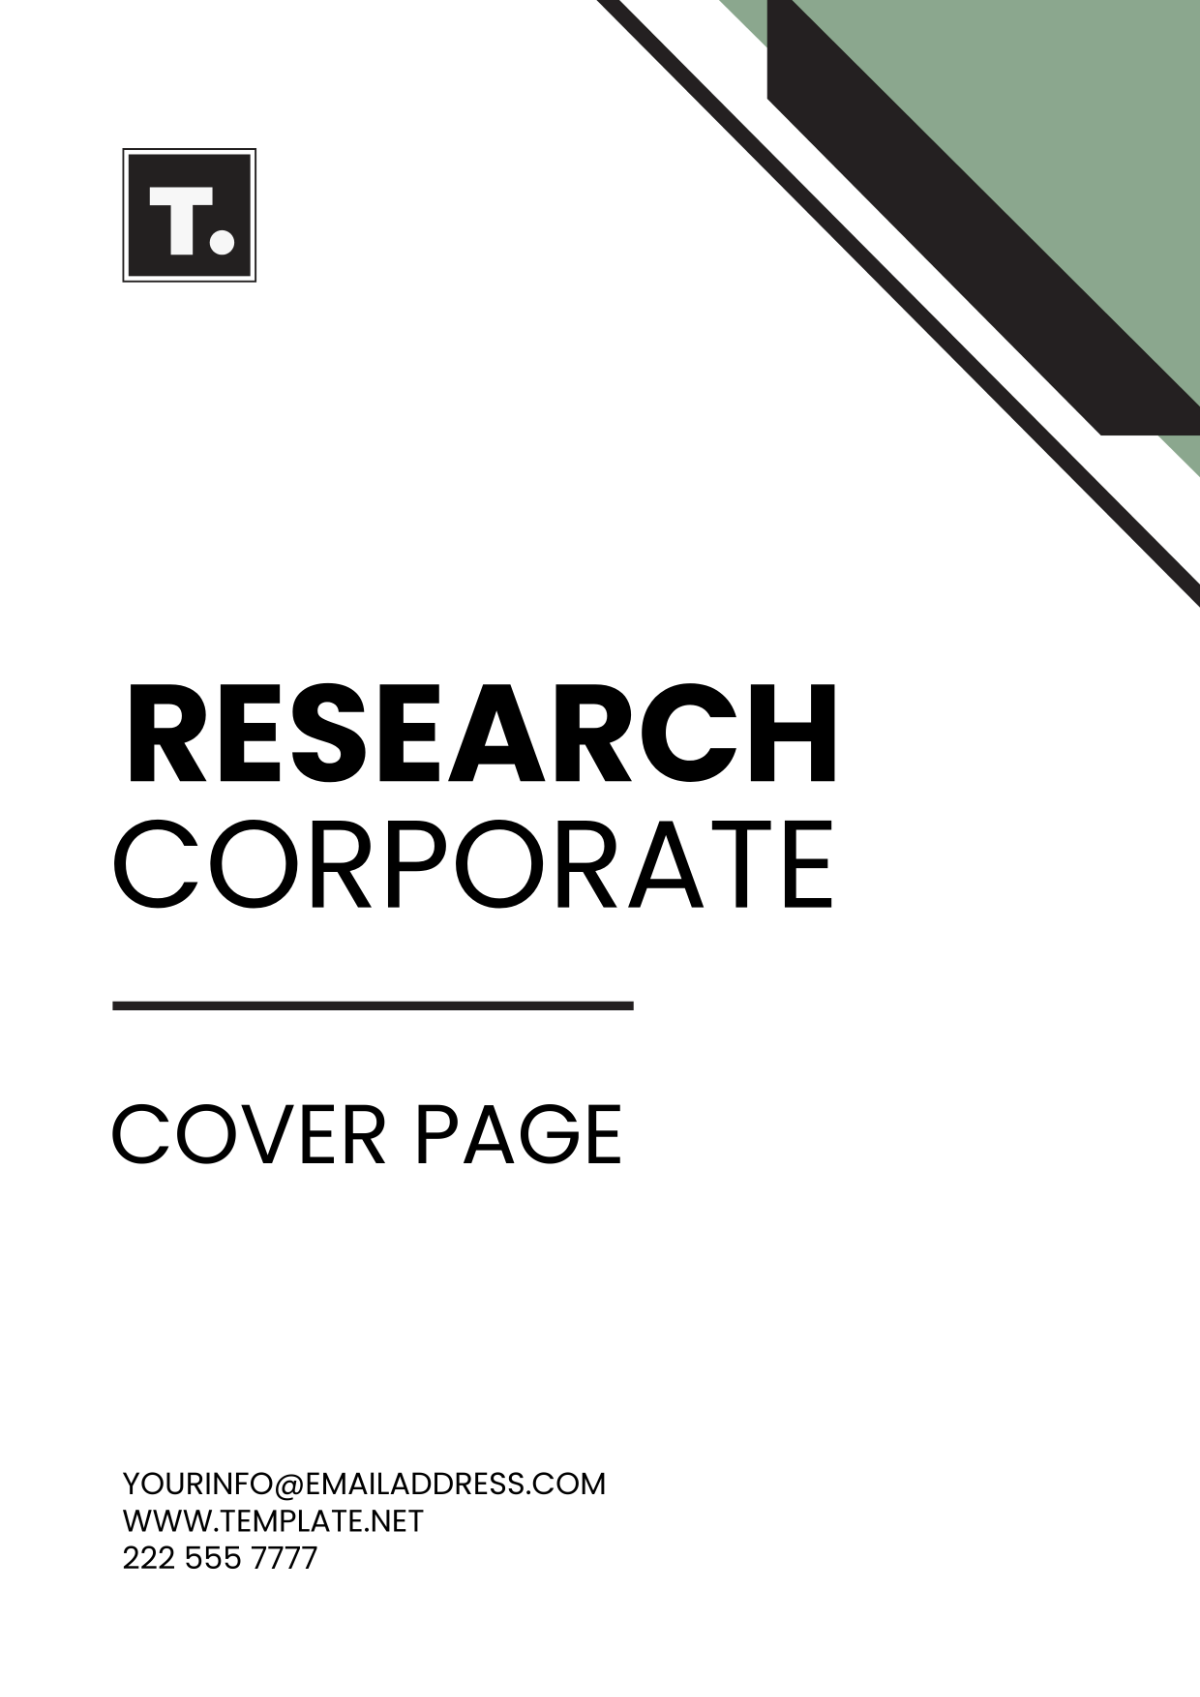 Research Corporate Cover Page